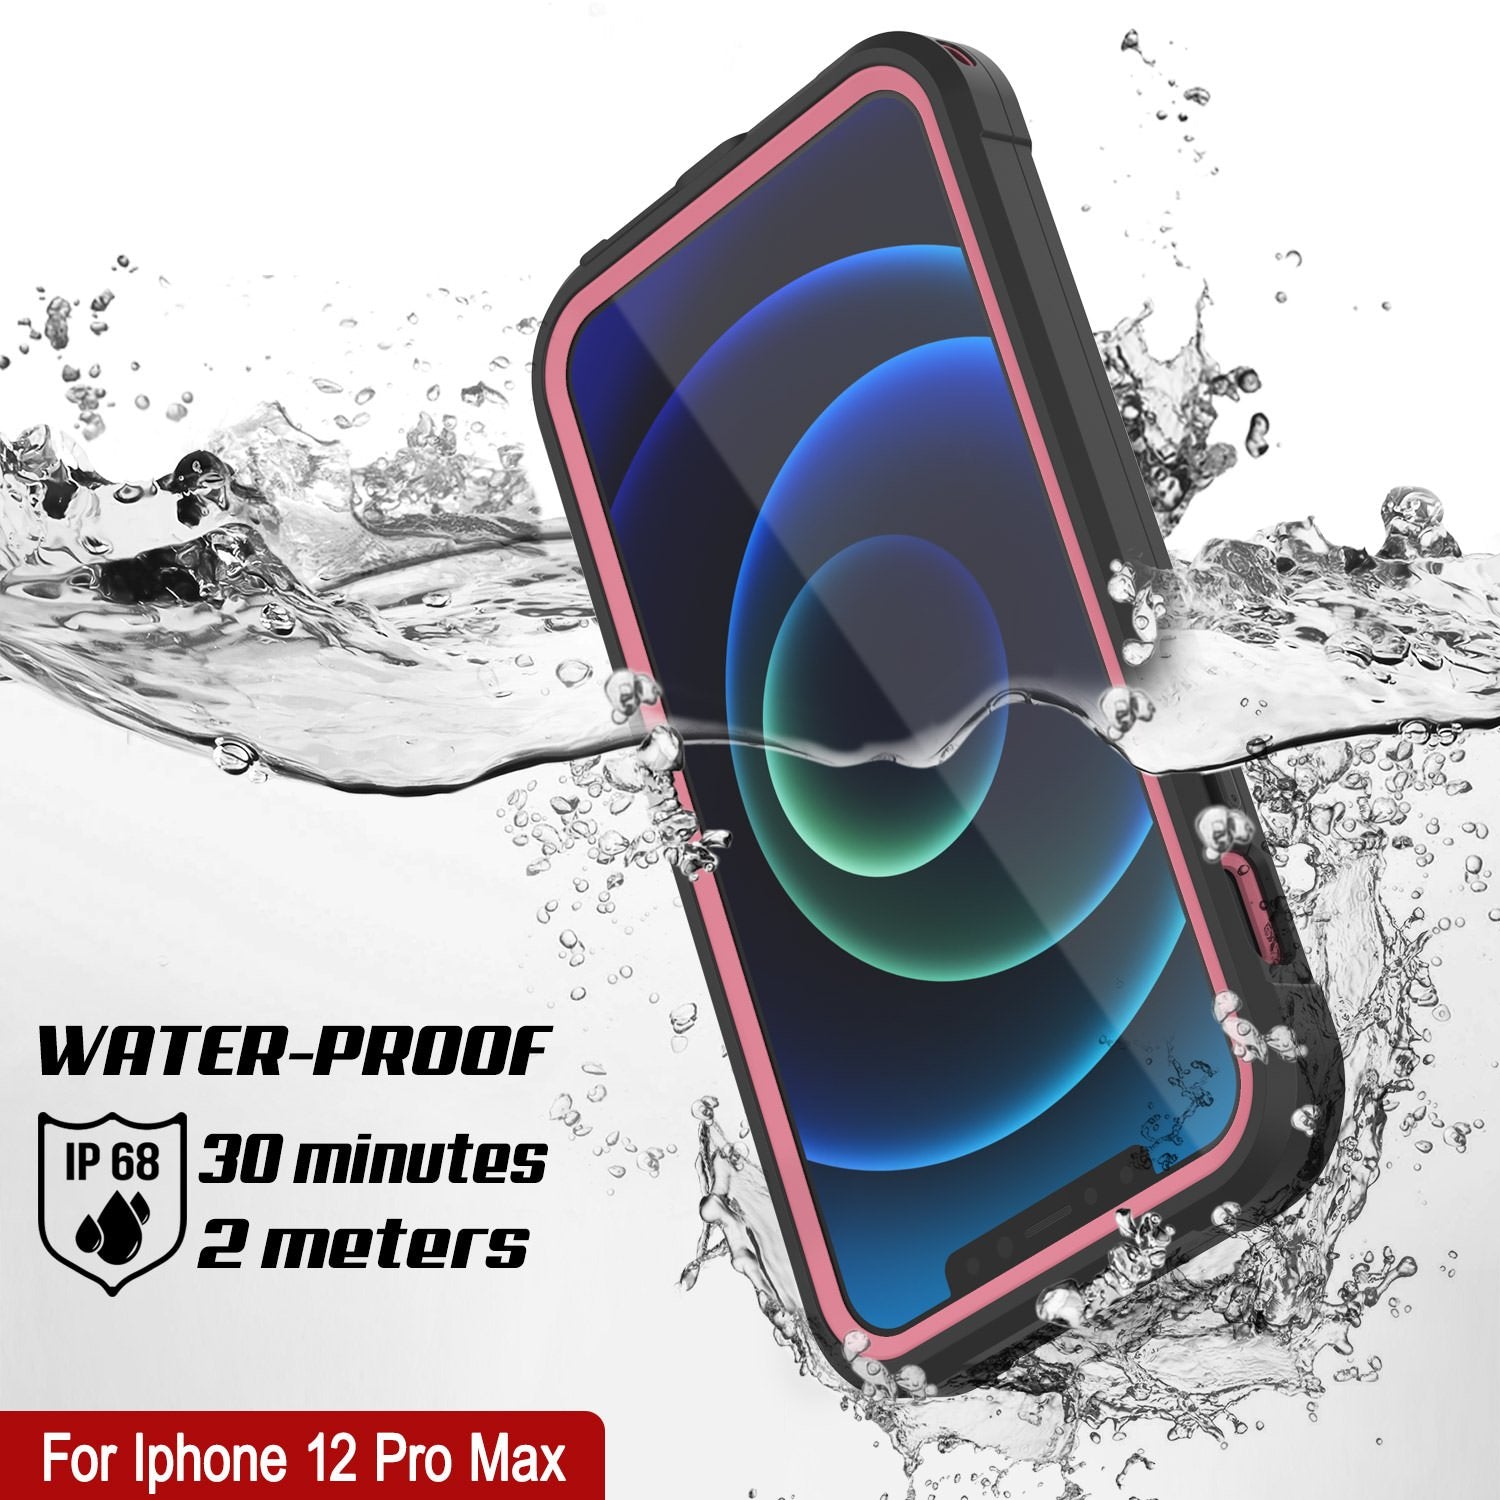 iPhone 12 Pro Max Waterproof IP68 Case, Punkcase [pink]  [Maximus Series] [Slim Fit] [IP68 Certified] [Shockresistant] Clear Armor Cover with Screen Protector | Ultimate Protection